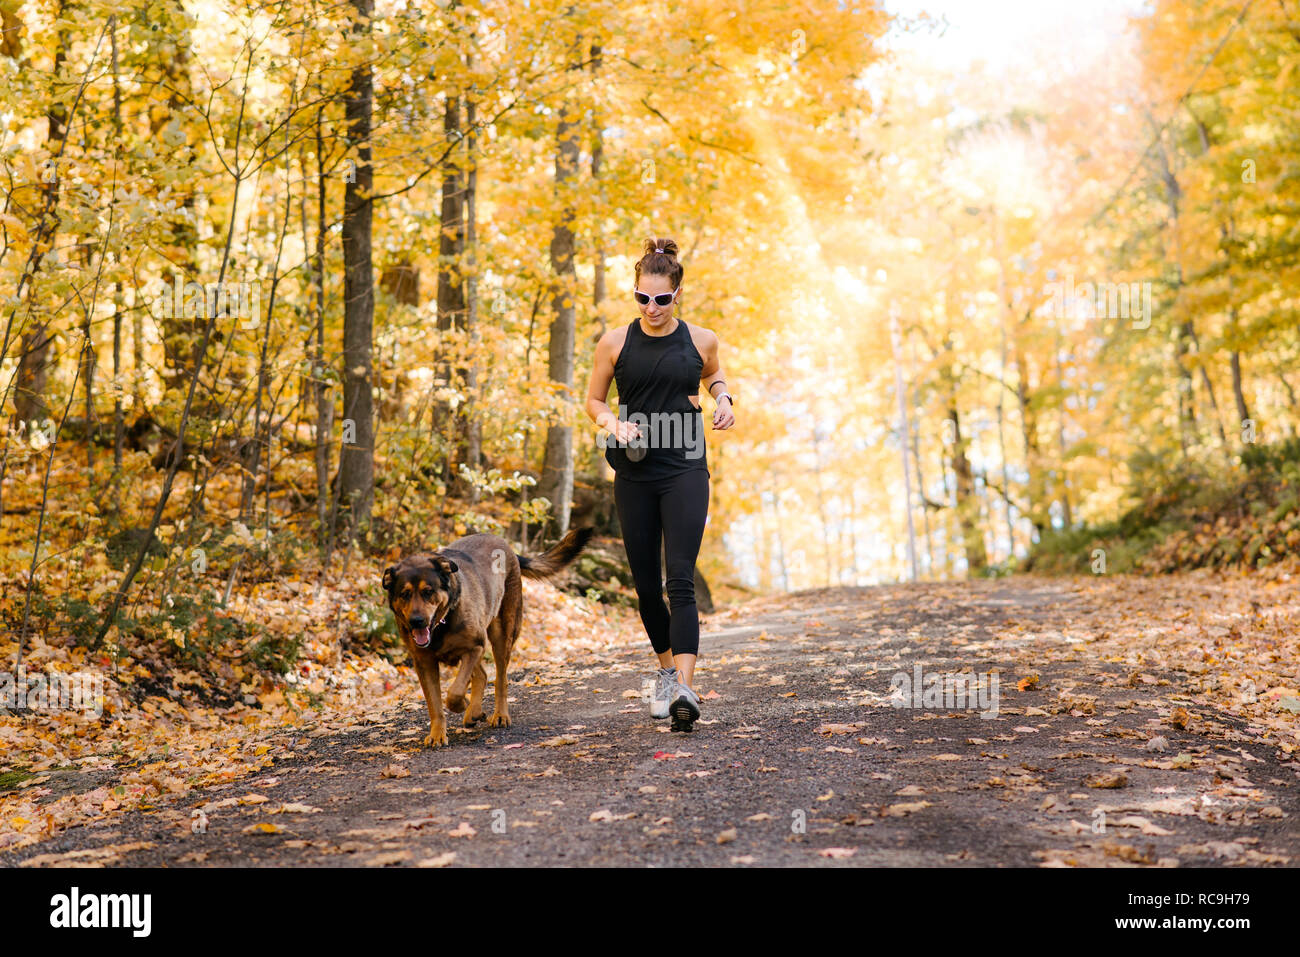 Woman jogging with dog in forest Stock Photo